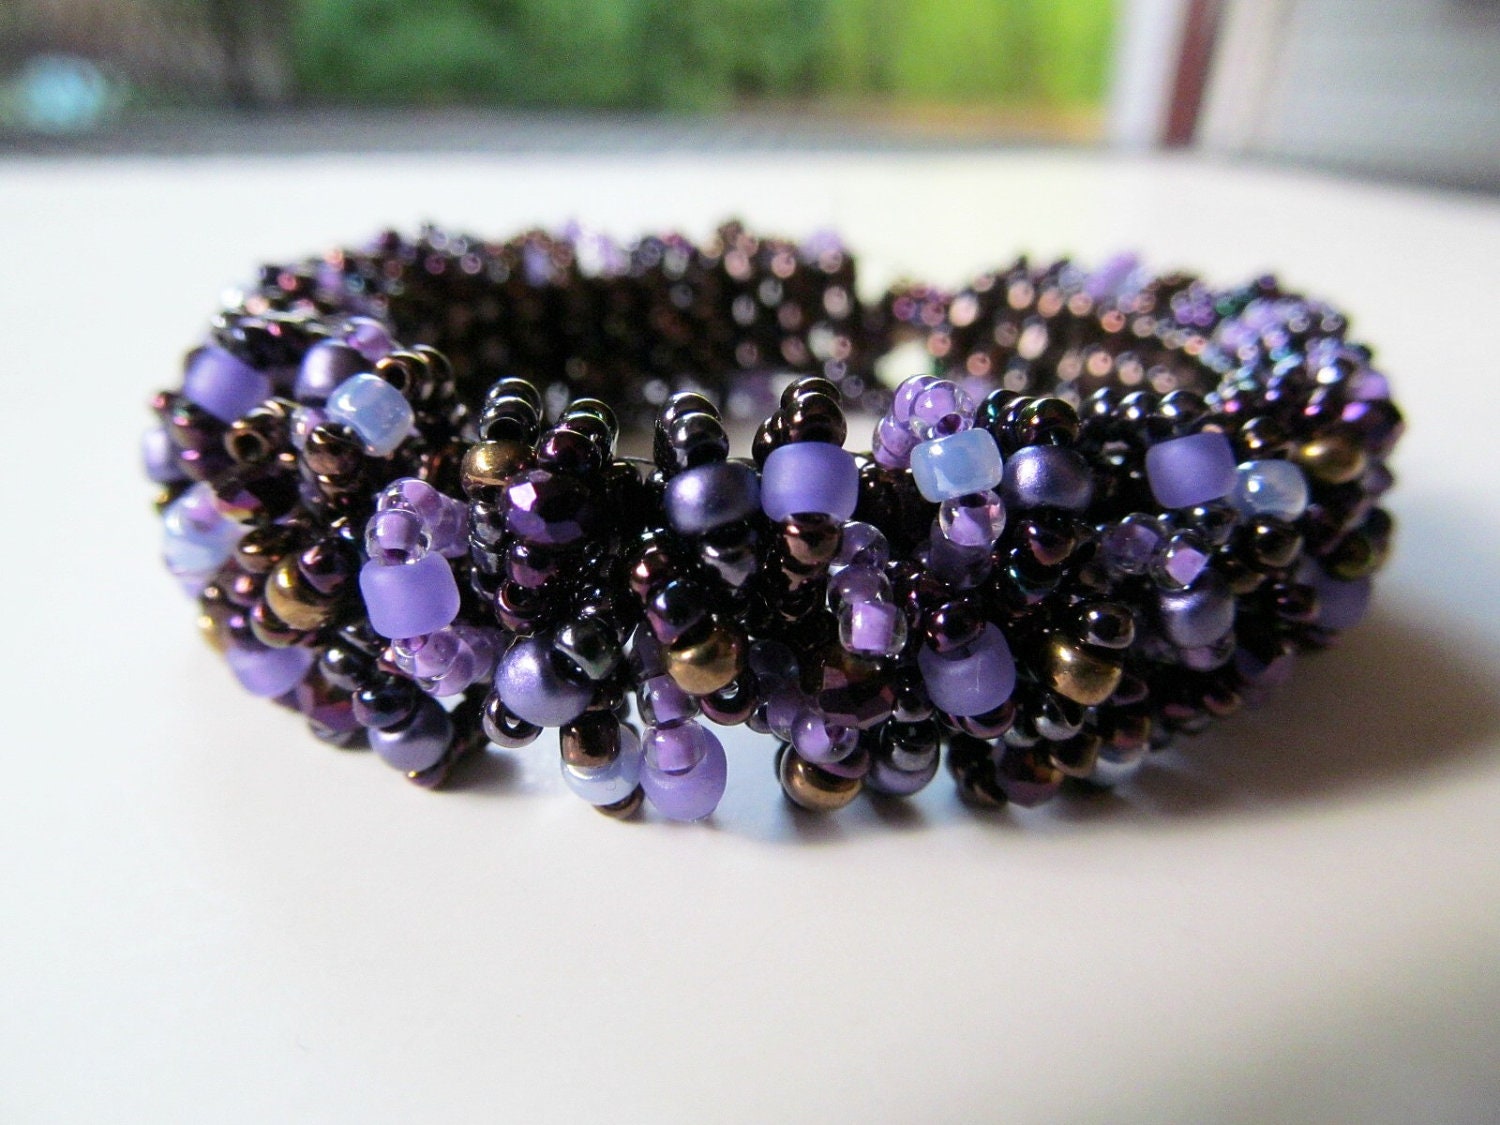 Custom Caterpillar Beadwoven Bracelet in Purple and Brown Made Just for You